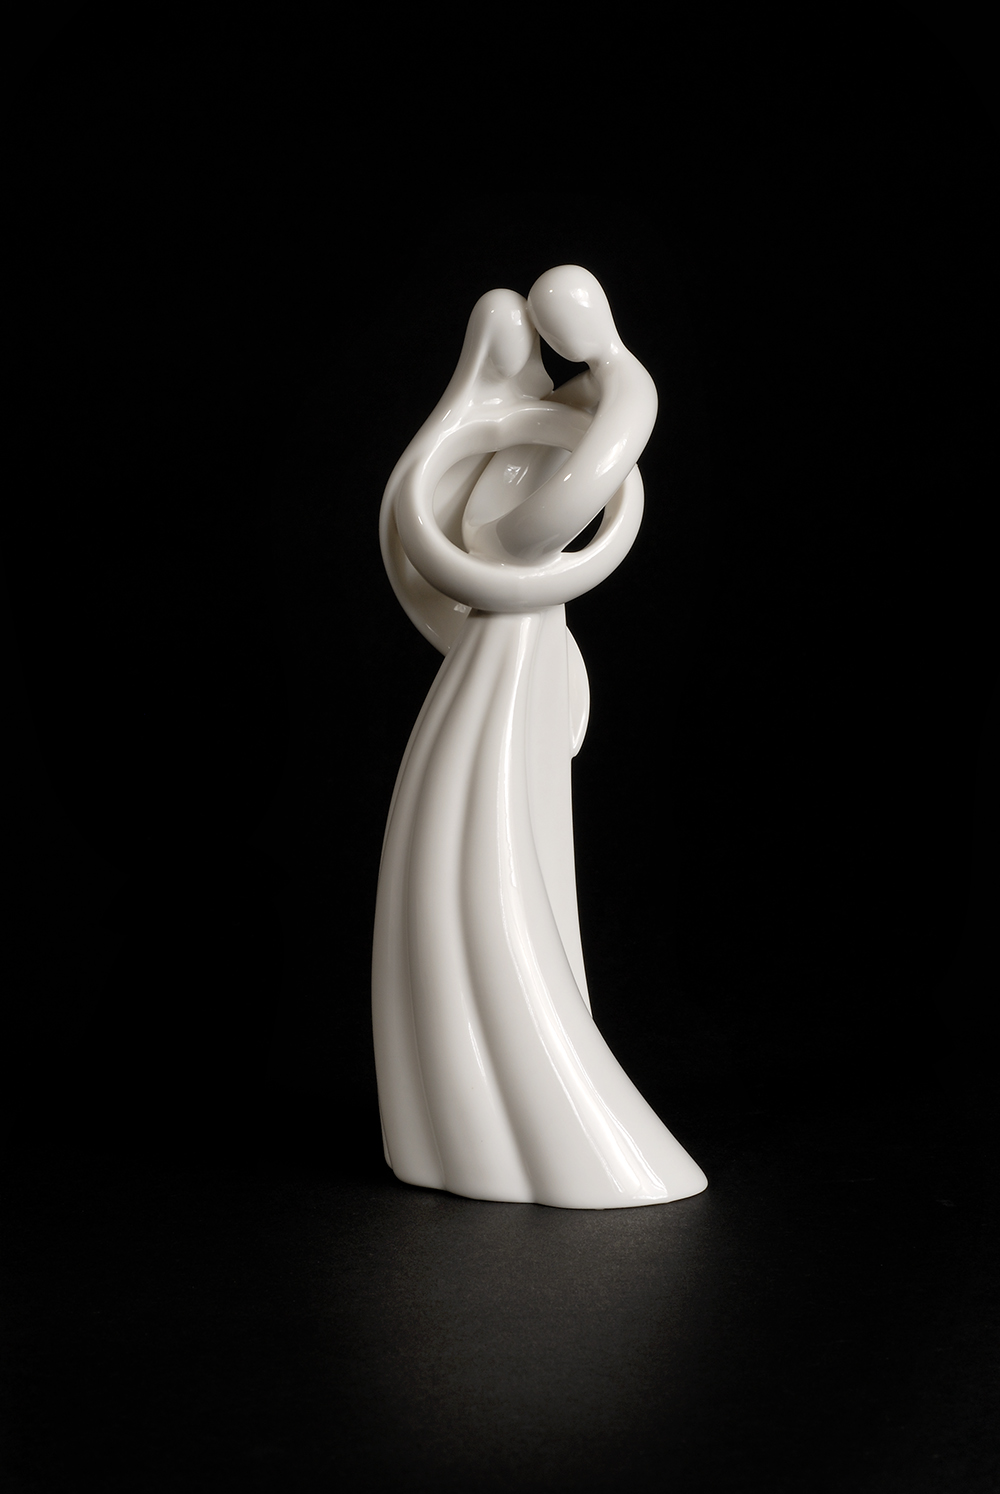 White Ceramic sculpture on black background Product Photography